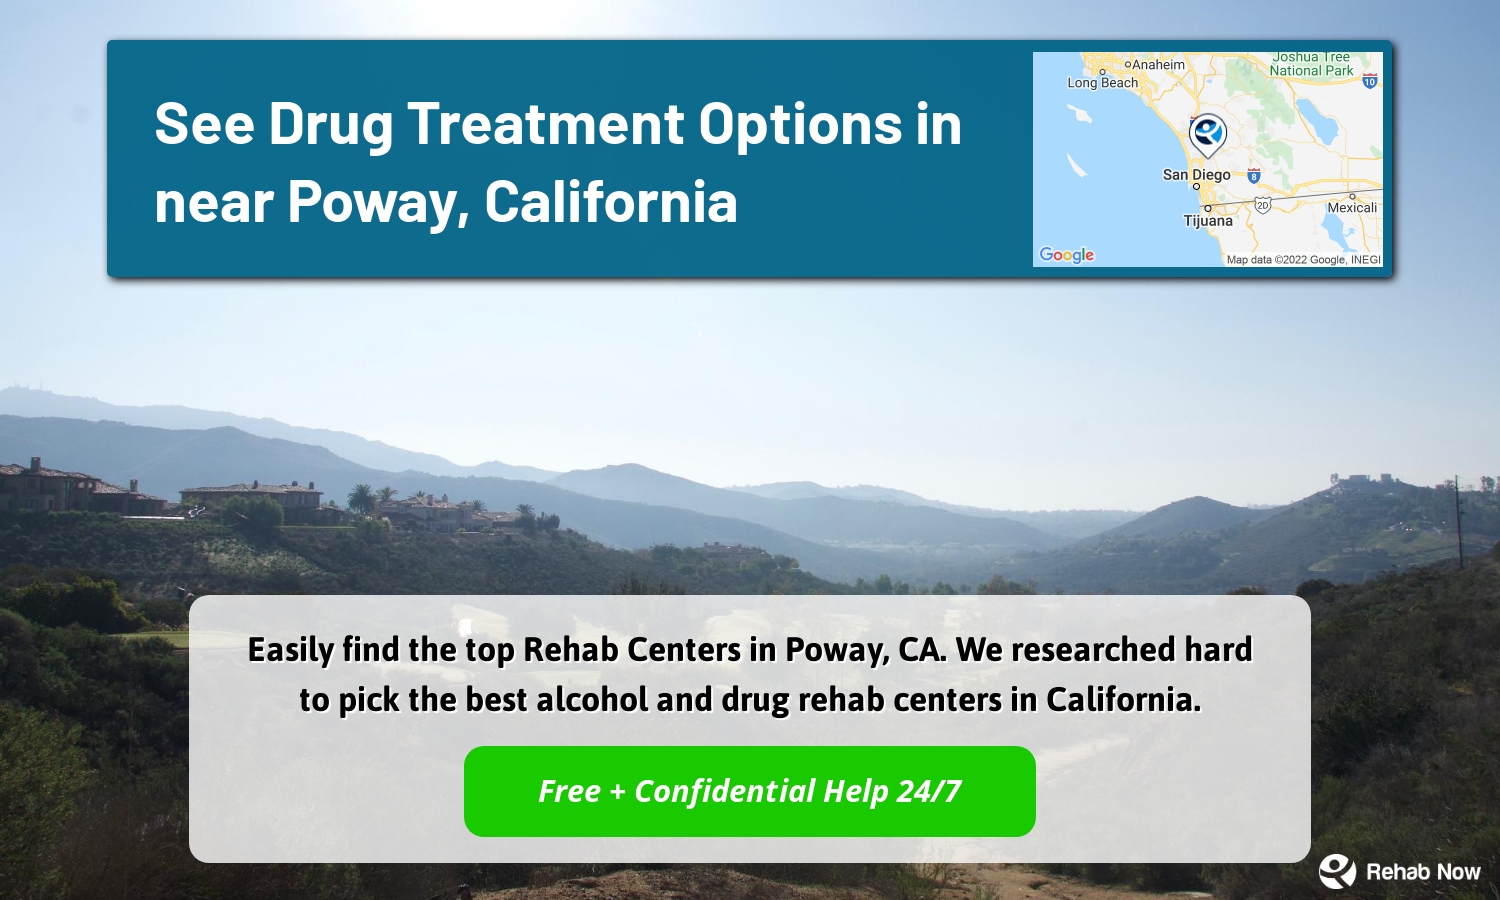 Easily find the top Rehab Centers in Poway, CA. We researched hard to pick the best alcohol and drug rehab centers in California.